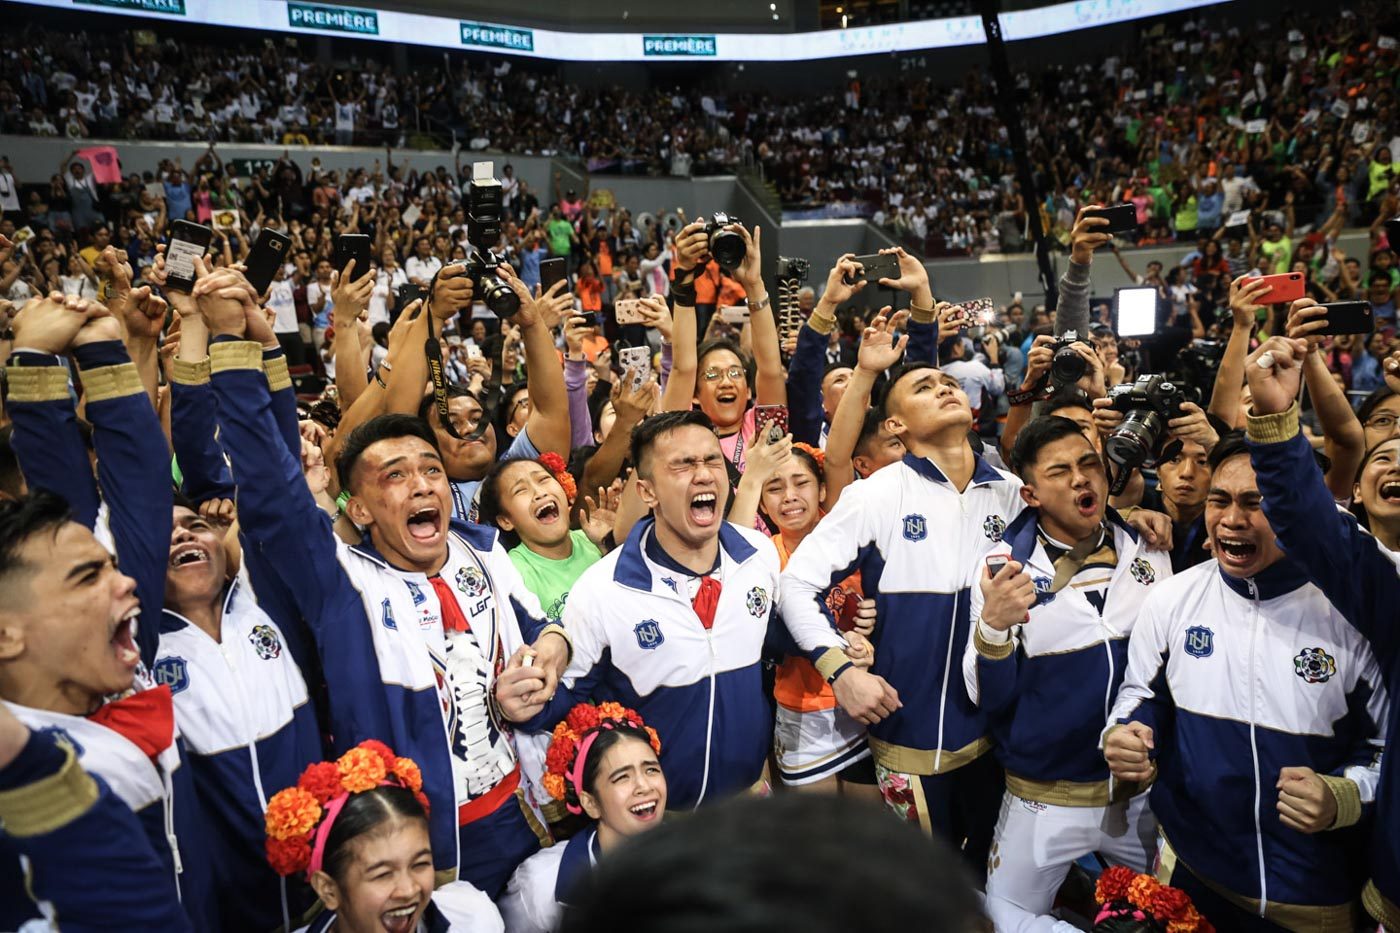 EMOTIONAL. The NU Pep Squad relishes the feeling of returning to the top of the podium after crashing out of the top 3 last year. Photo by Josh Albelda/Rappler  